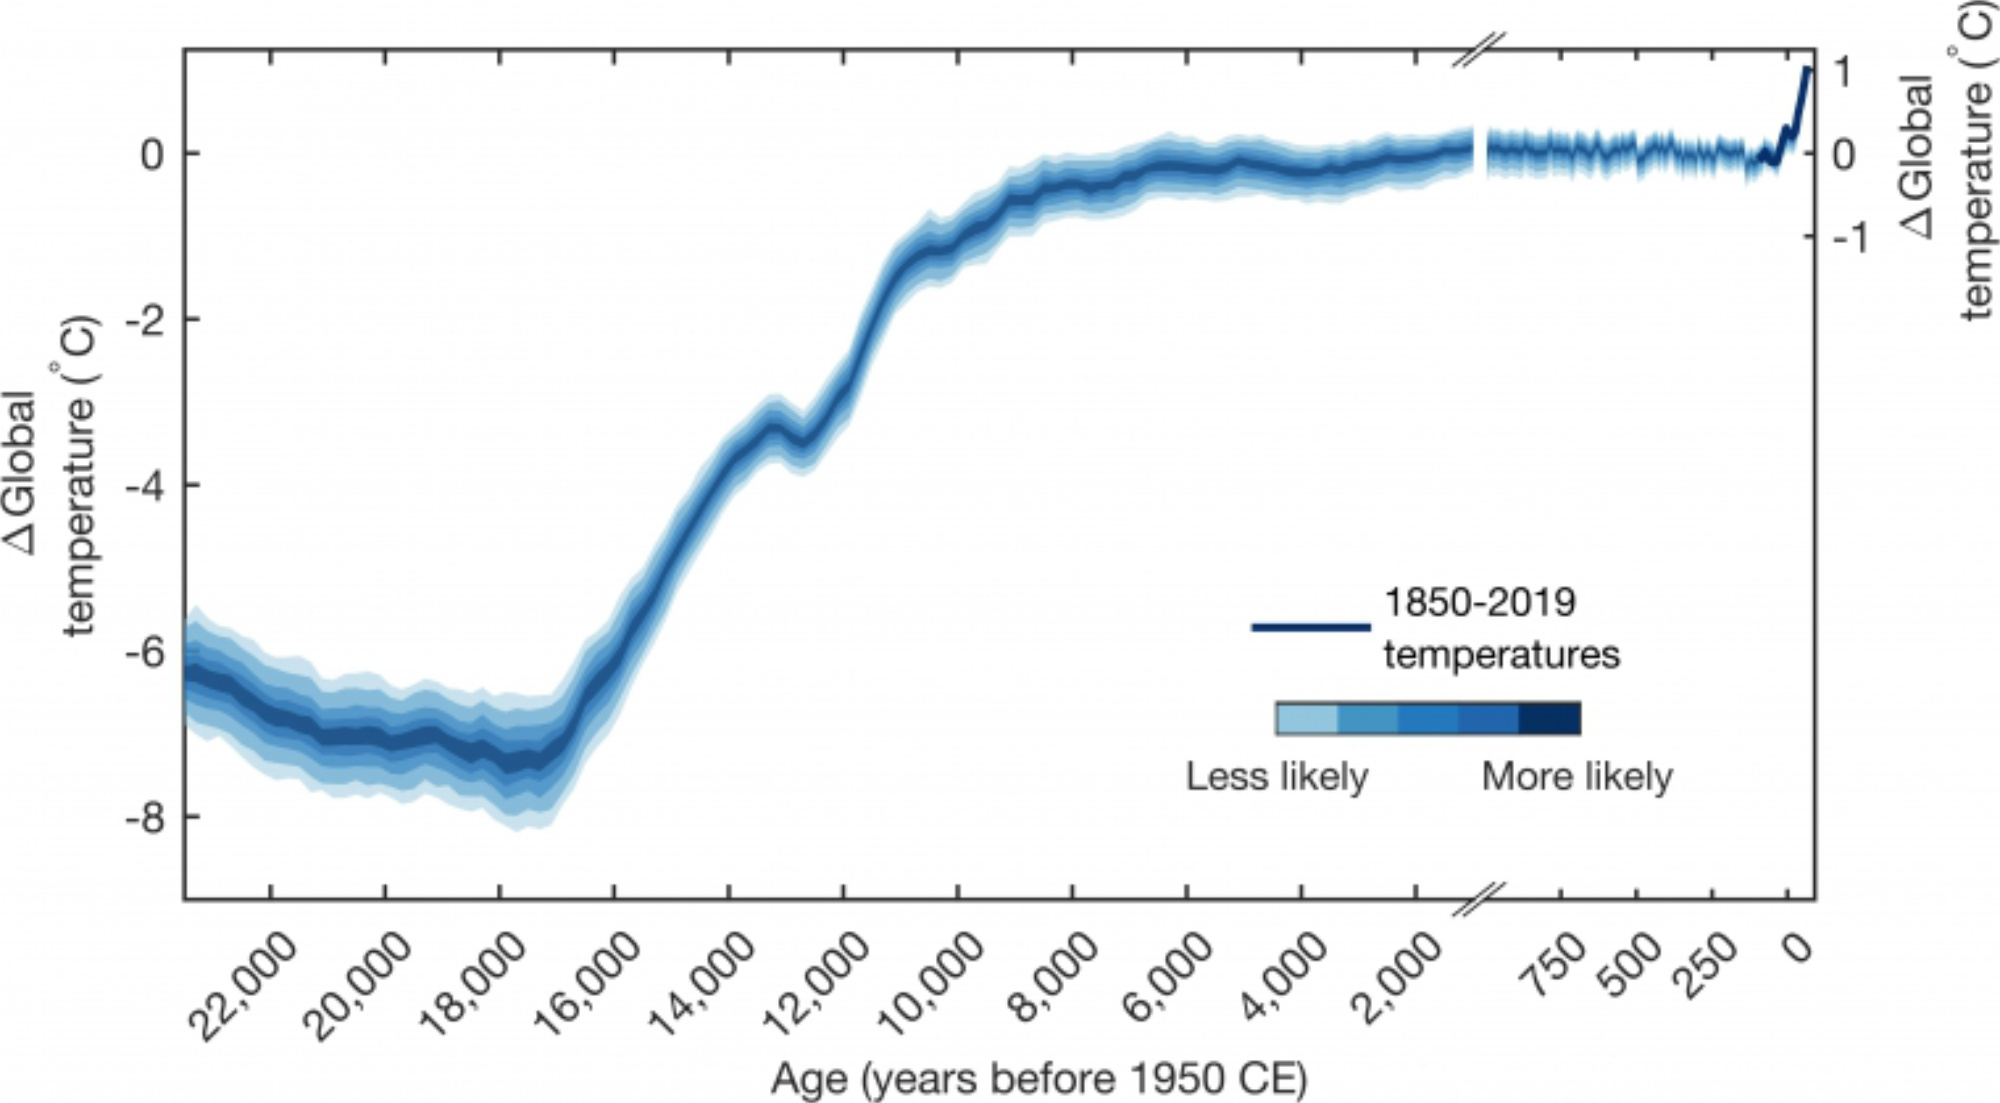 Graph of global average surface temperature over time, showing significant change from about 20,000 years ago to 10,000 years ago, and then fairly steady temperature from 10,000 years ago until about 100 years ago, where temperature rises rapidly.